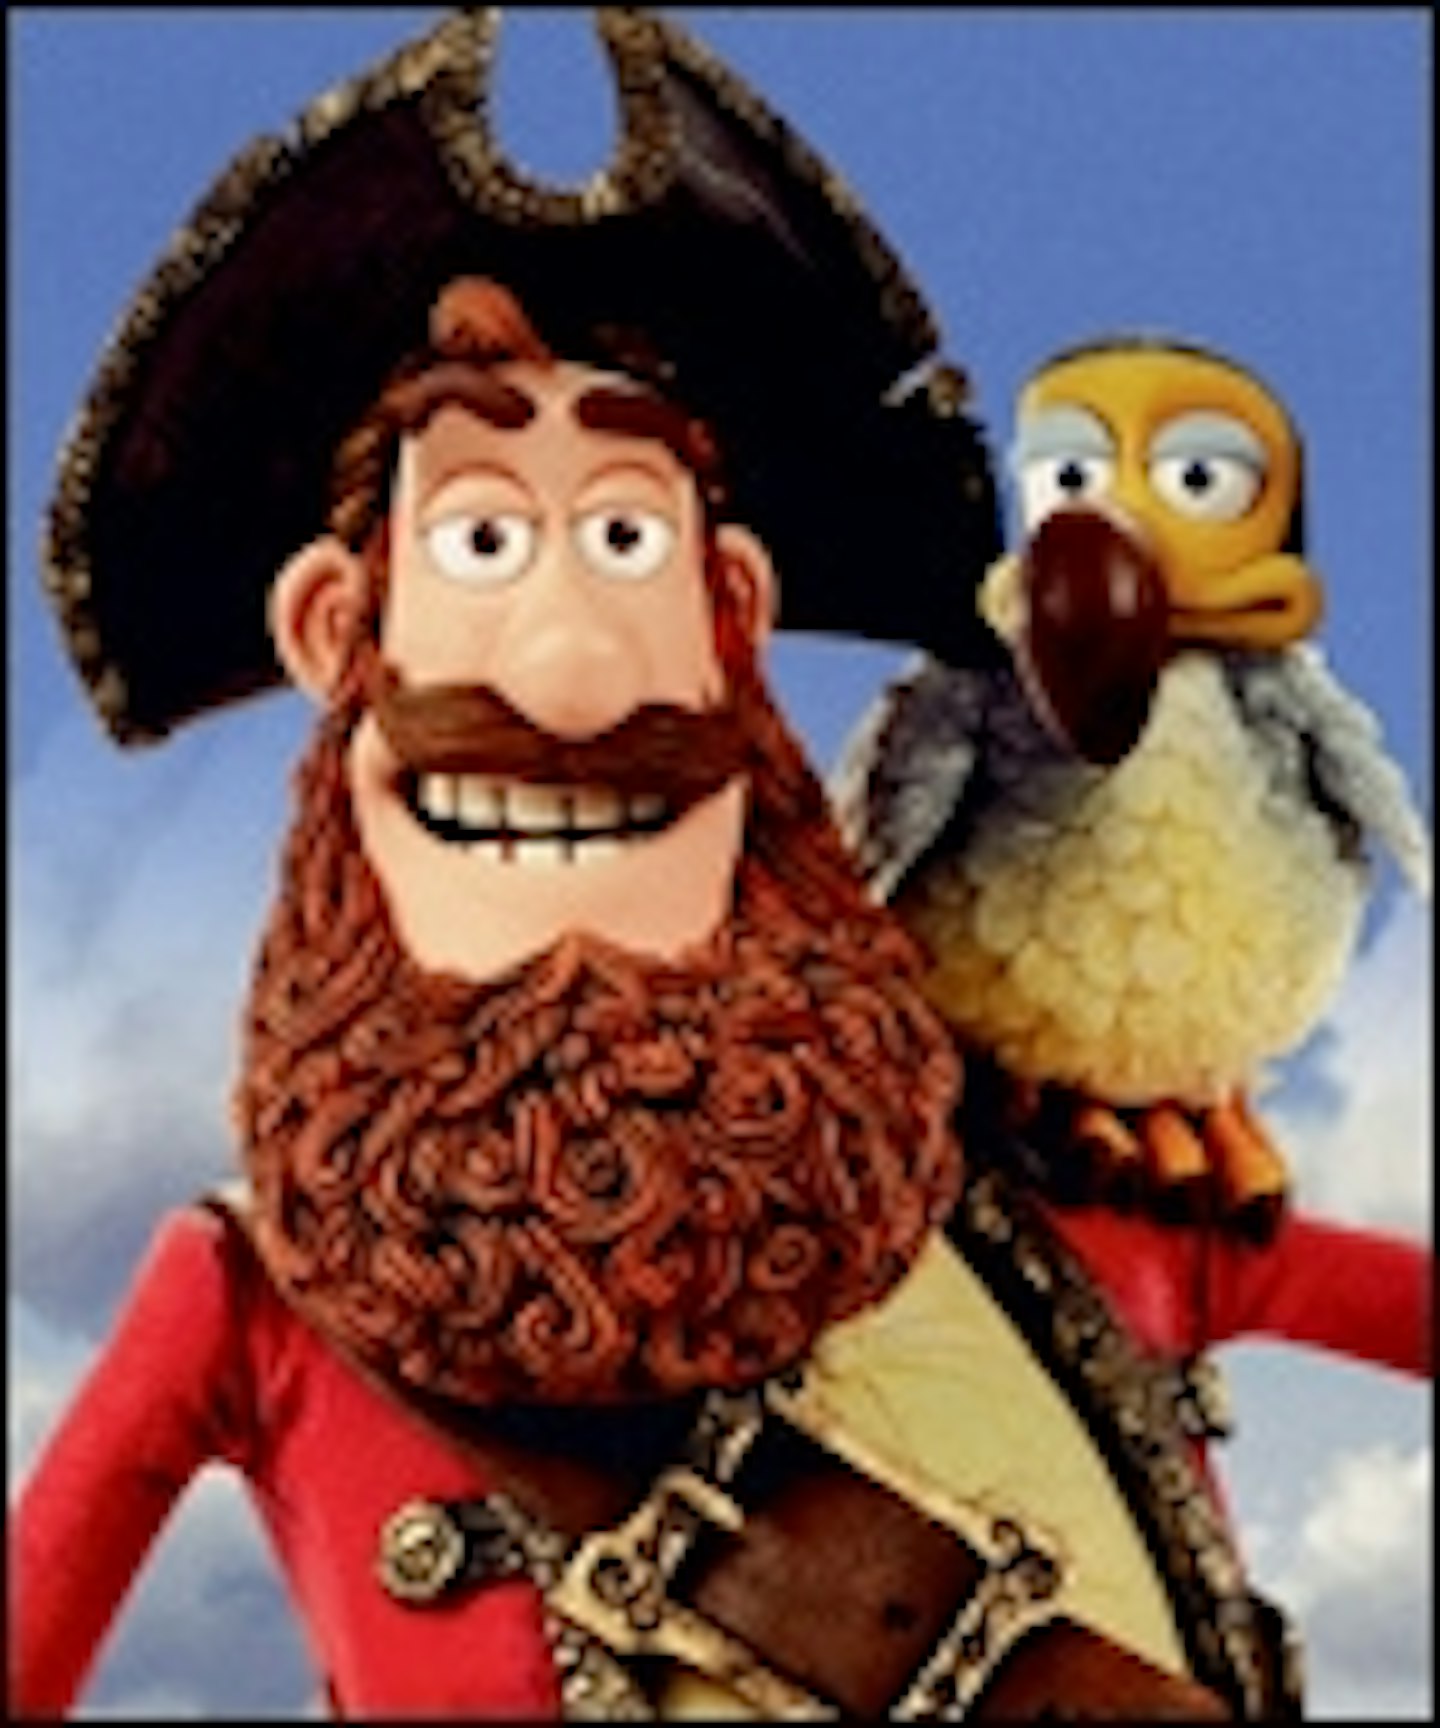 New Promo For Aardman's The Pirates!